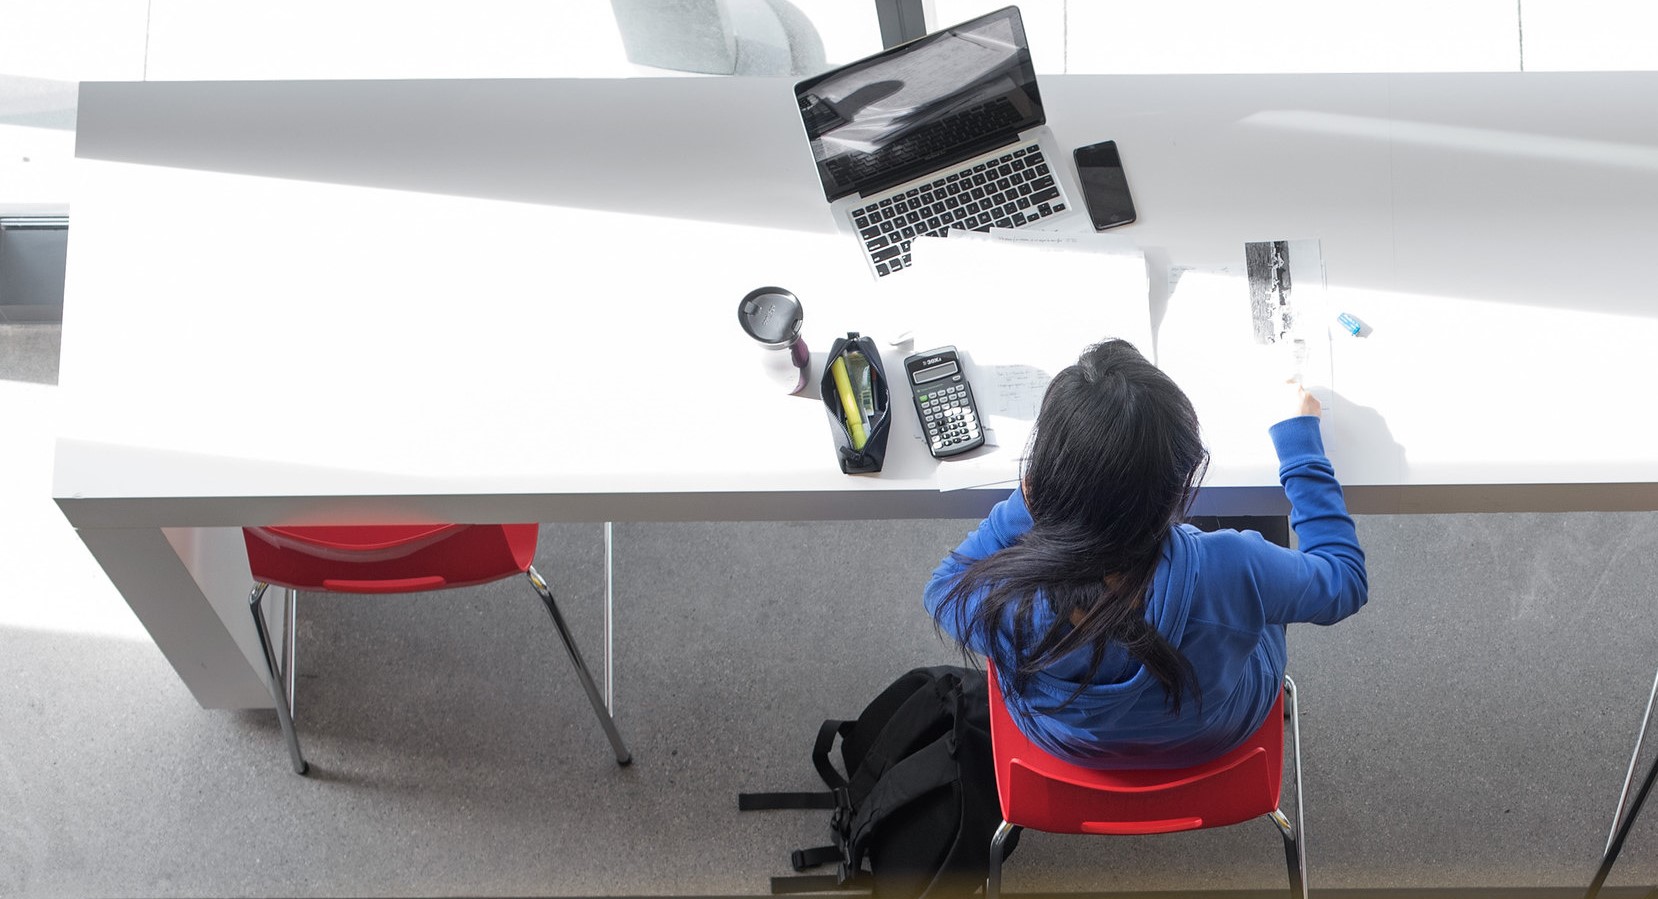 A birds-eye view of a student studying at a table with her laptop out.